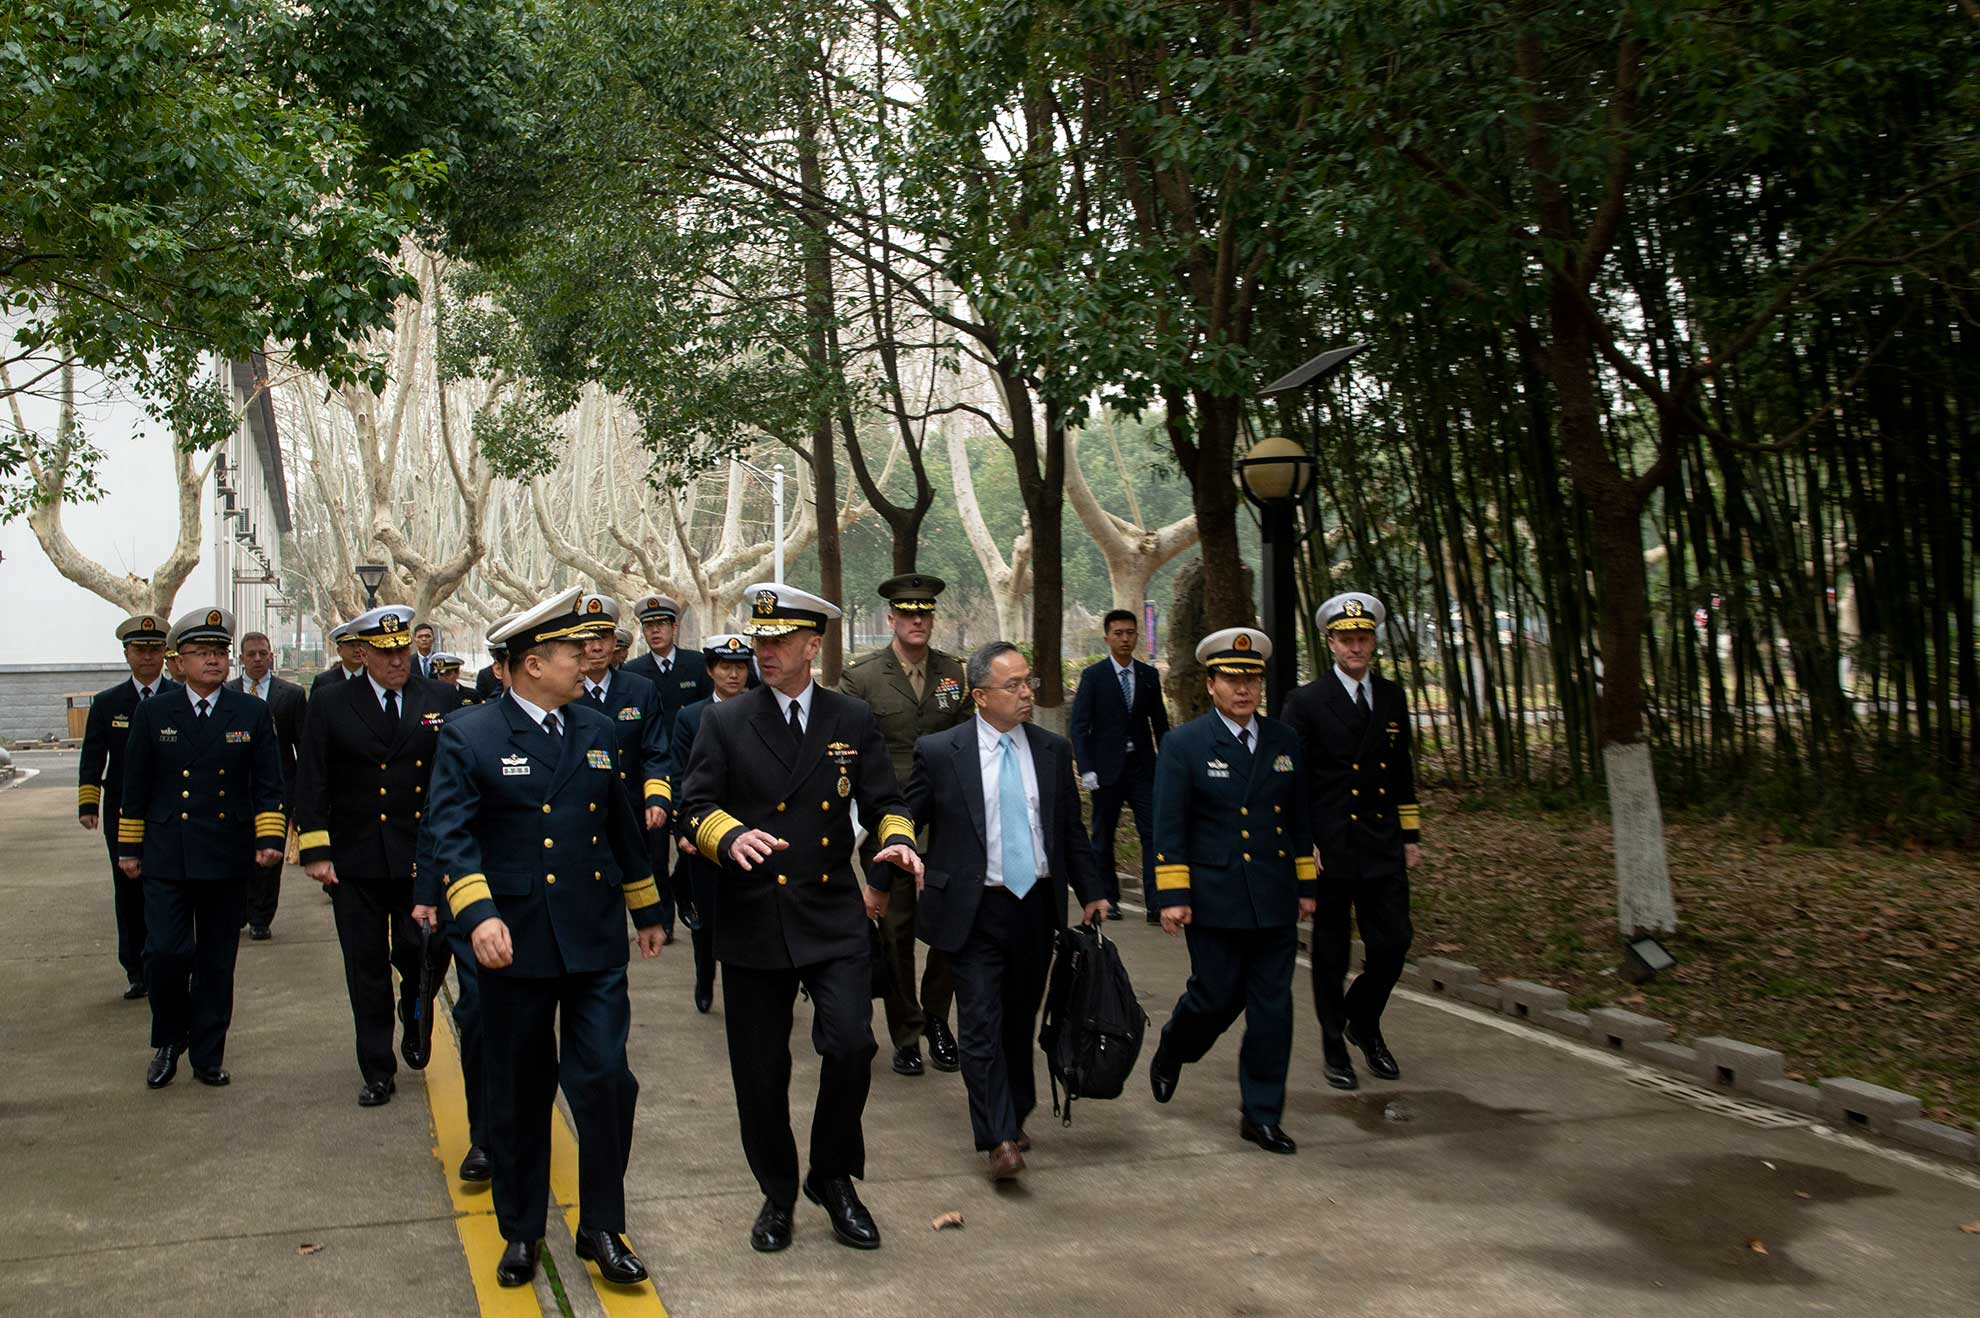 Nanjing, China China (Jan. 15, 2019) Chief of Naval Operations (CNO) Adm. John Richardson visits the People's Liberation Army (Navy) (PLA(N)) Command College for a roundtable discussion where he underscored the importance of lawful and safe operations around the globe. Richardson is on a three-day visit to Beijing and Nanjing to continue the ongoing dialog between the two militaries and encourage professional interactions at sea, specifically addressing risk reduction and operational safety measures to prevent unwanted and unnecessary escalation -- U.S. Navy Photo by Chief MCS Elliott Fabrizio. -